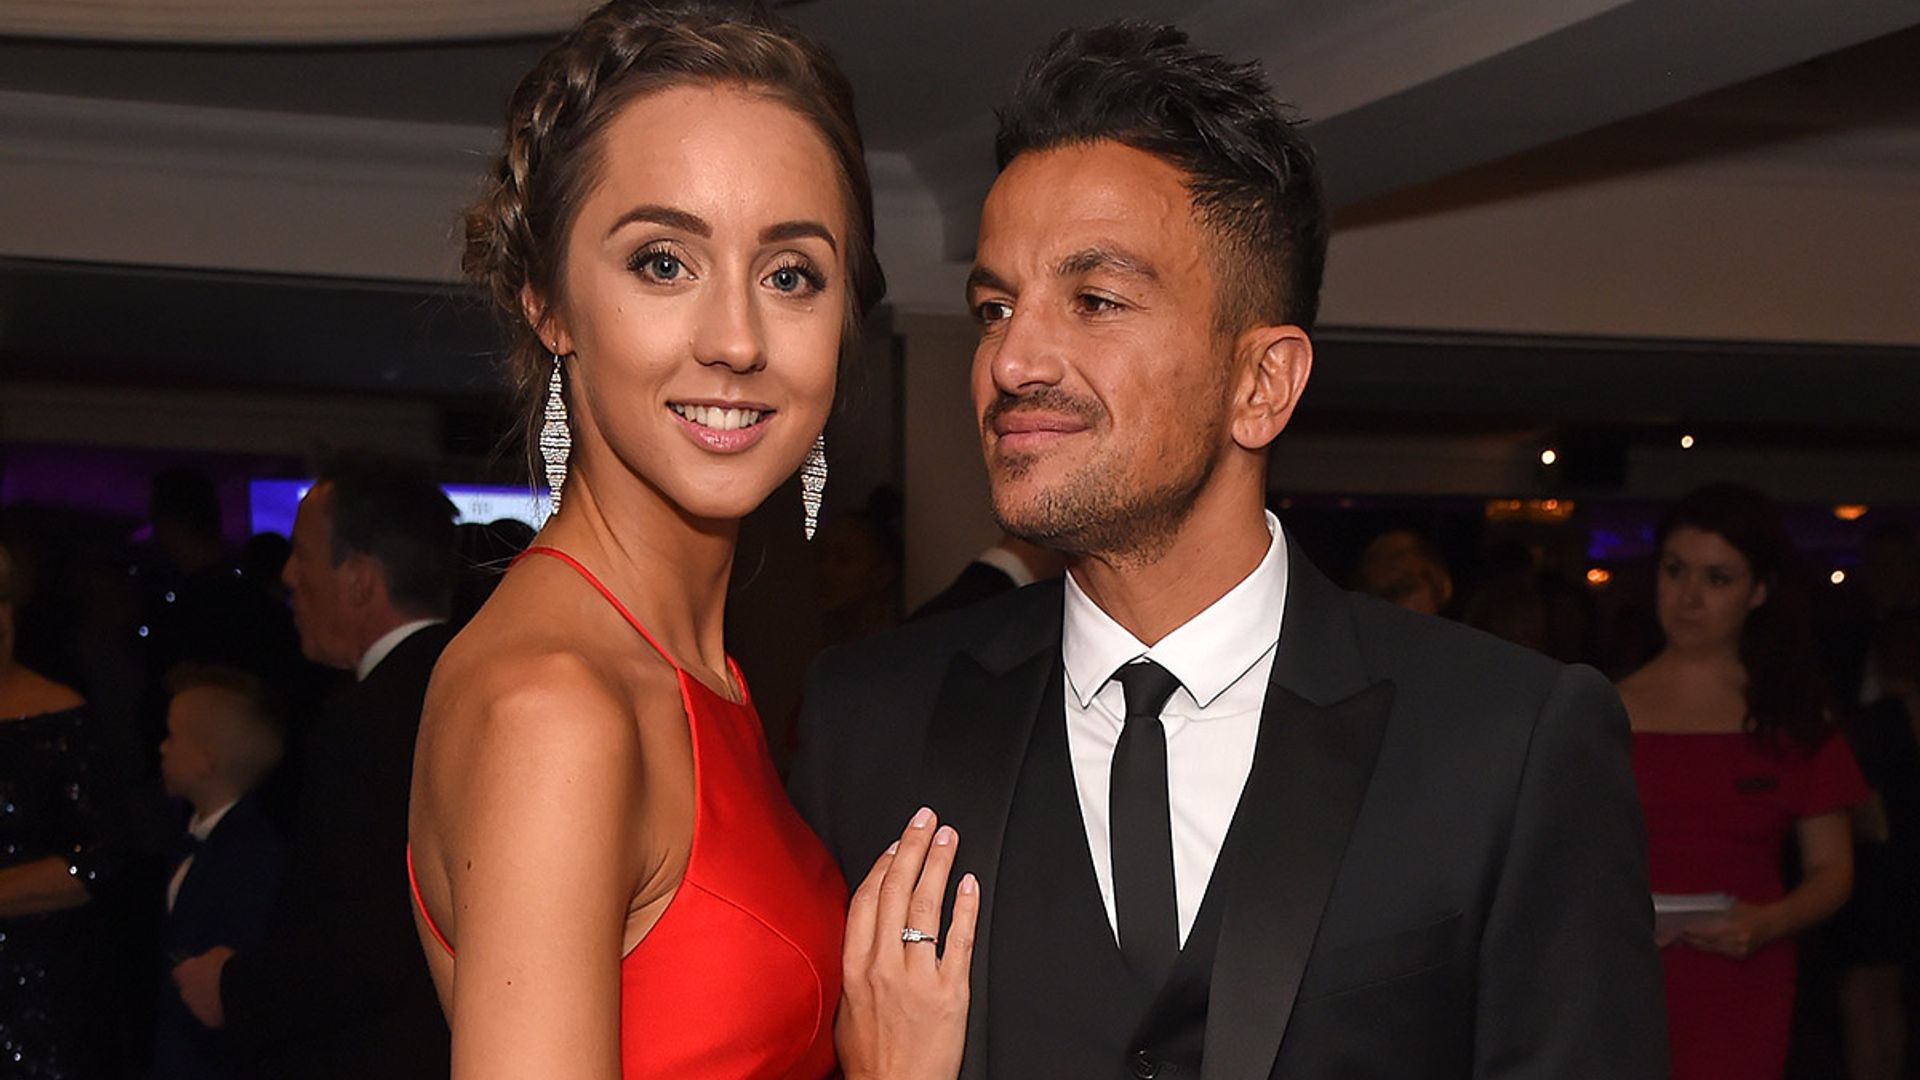 Peter Andre's wife Emily just completely stole the show in a red hot dress